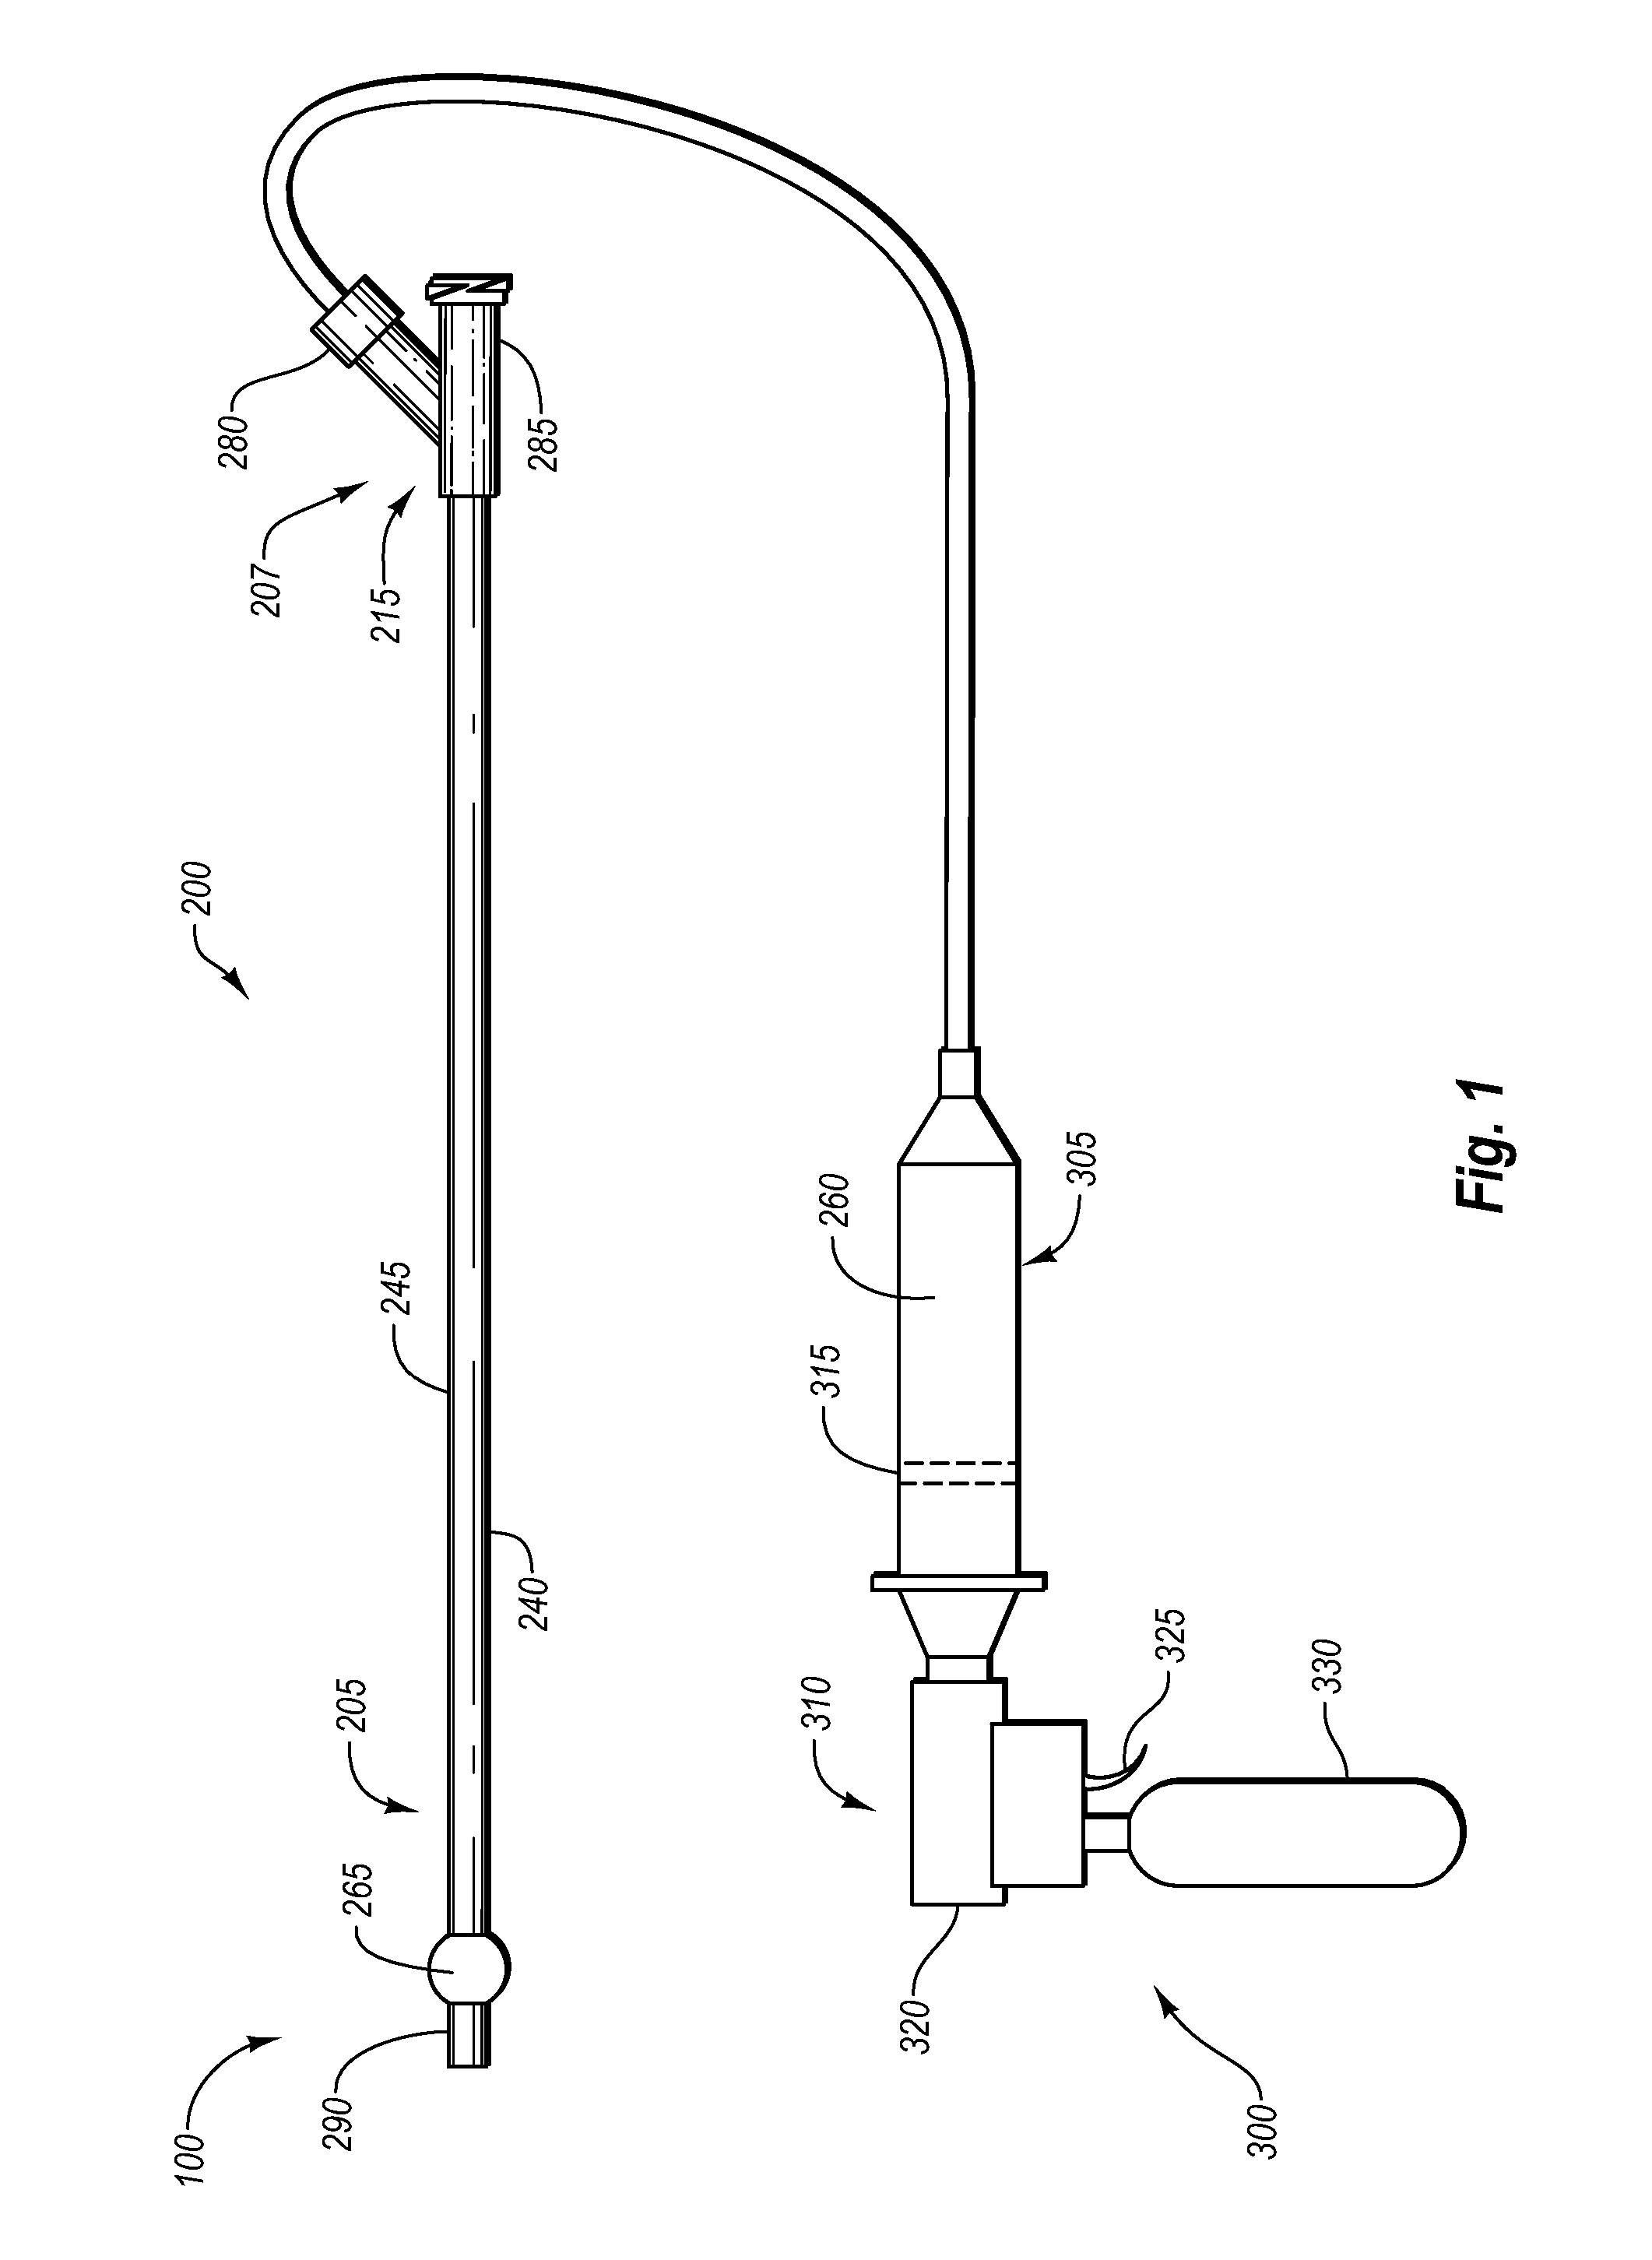 Systems, methods, and devices for injecting media contrast